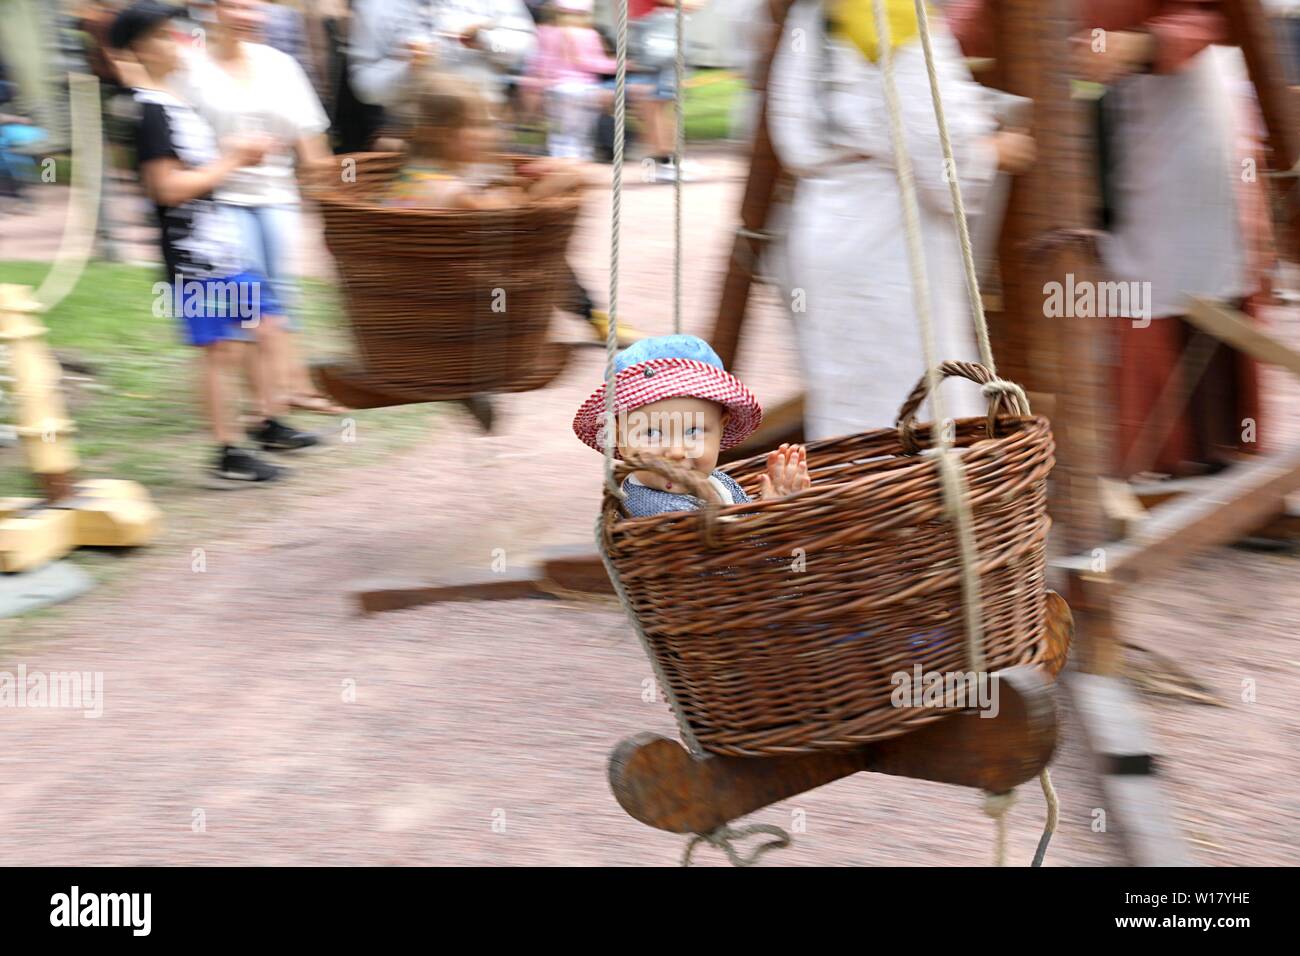 Beijing, Finland. 29th June, 2019. A child enjoys a manually-operated merry-go-round in Turku, southwestern Finland, on June 29, 2019. The annual Medieval Market, one of the largest historical events in Finland, is held in Turku from June 27 to June 30. Modern people can enjoy ancient music and dance, historical street plays, traditional food and handicrafts during the event. Credit: Zhang Xuan/Xinhua/Alamy Live News Stock Photo